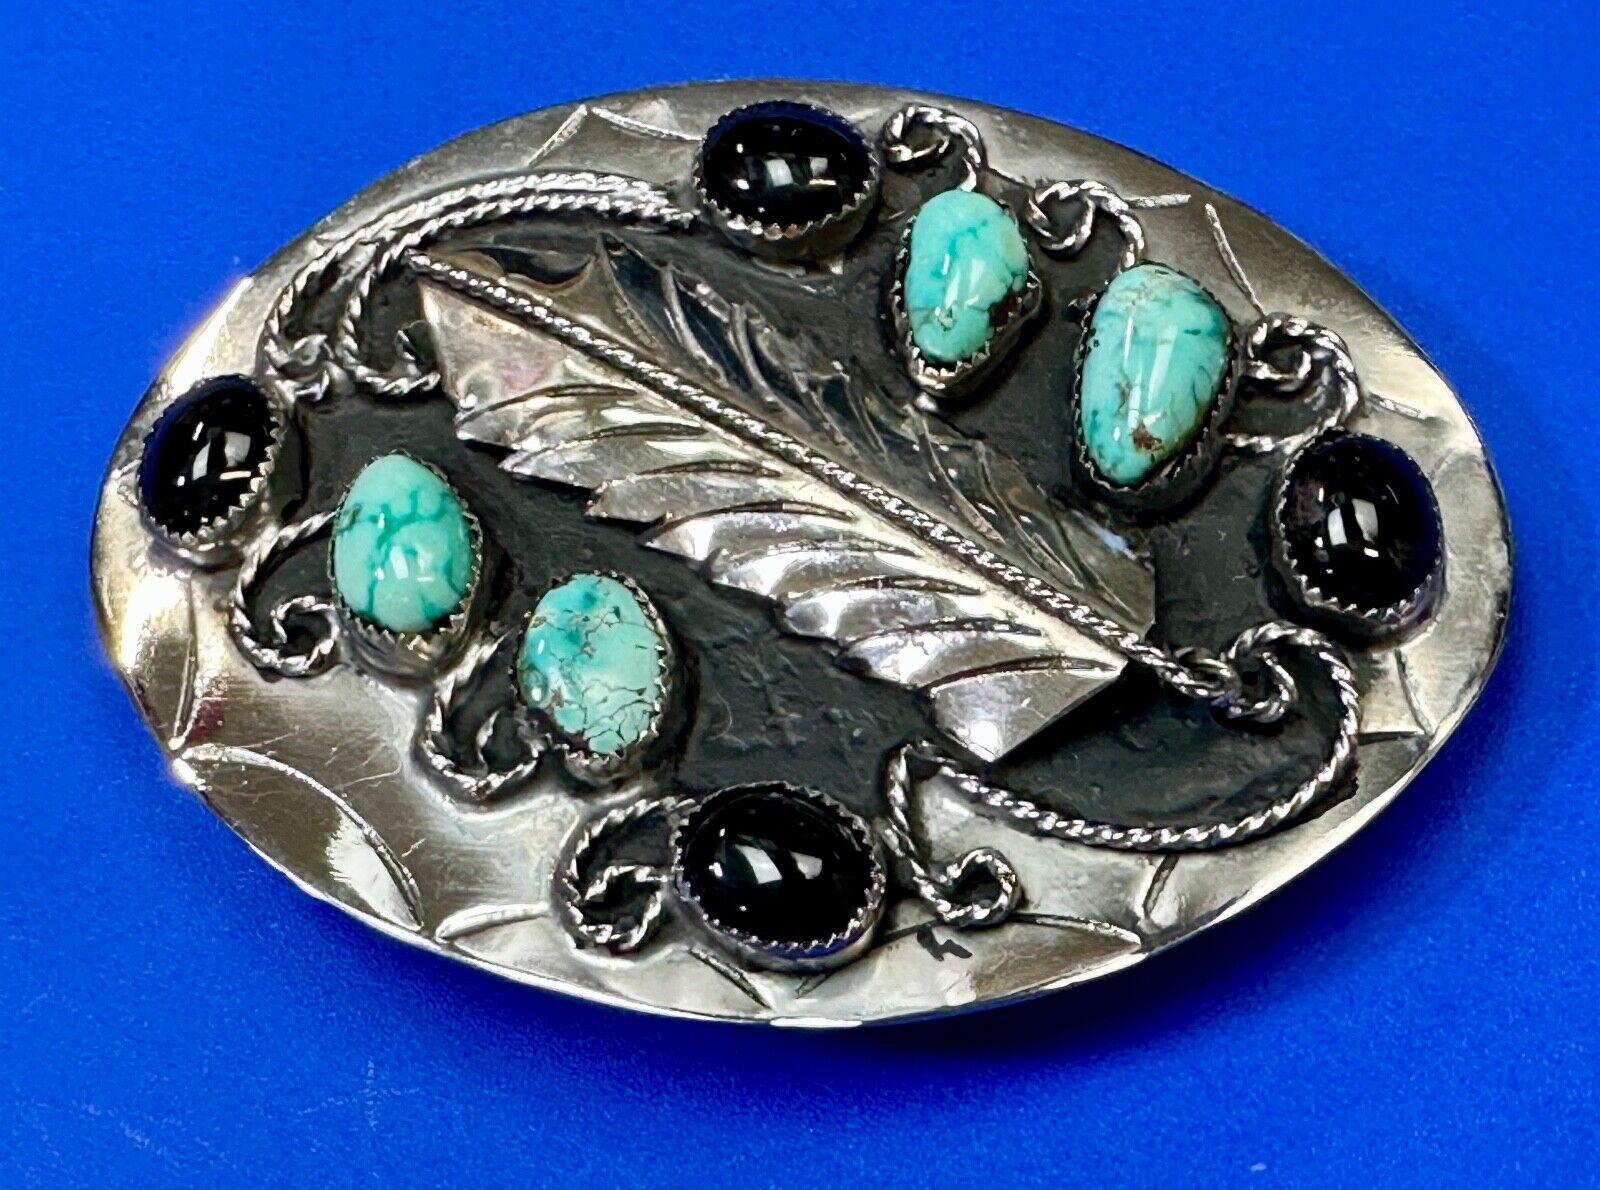 Gorgeous  Native American Indian Artisan turquoise stones & Feathers belt buckle